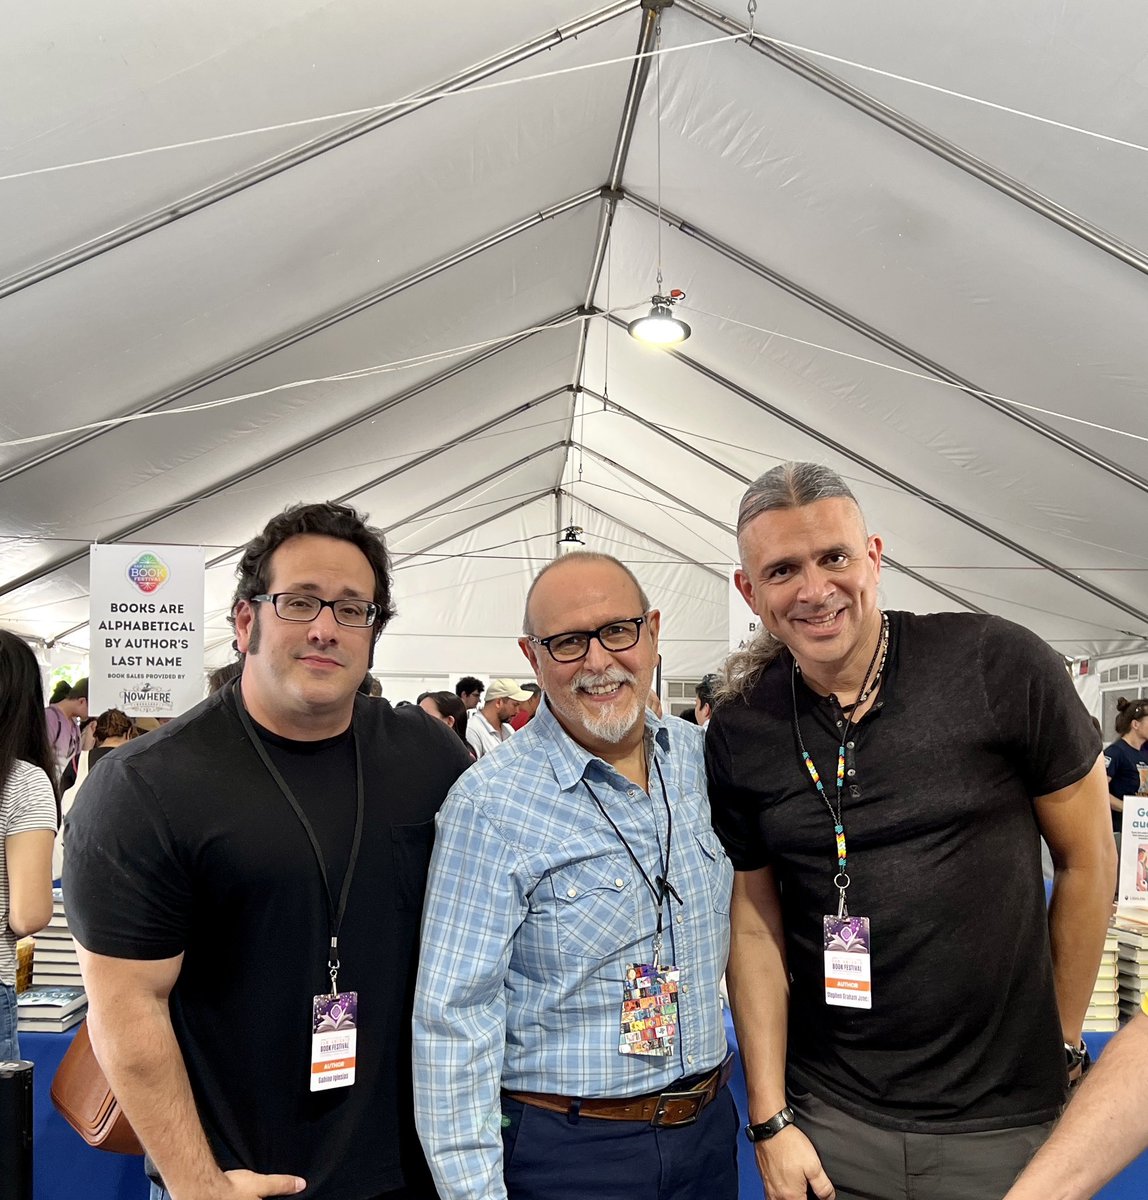 Super happy to spend some time with these two amazing writers: @gabino_iglesias and @SGJ72 . ❤️👊🏽❤️ #sabookfest @SABookFestival